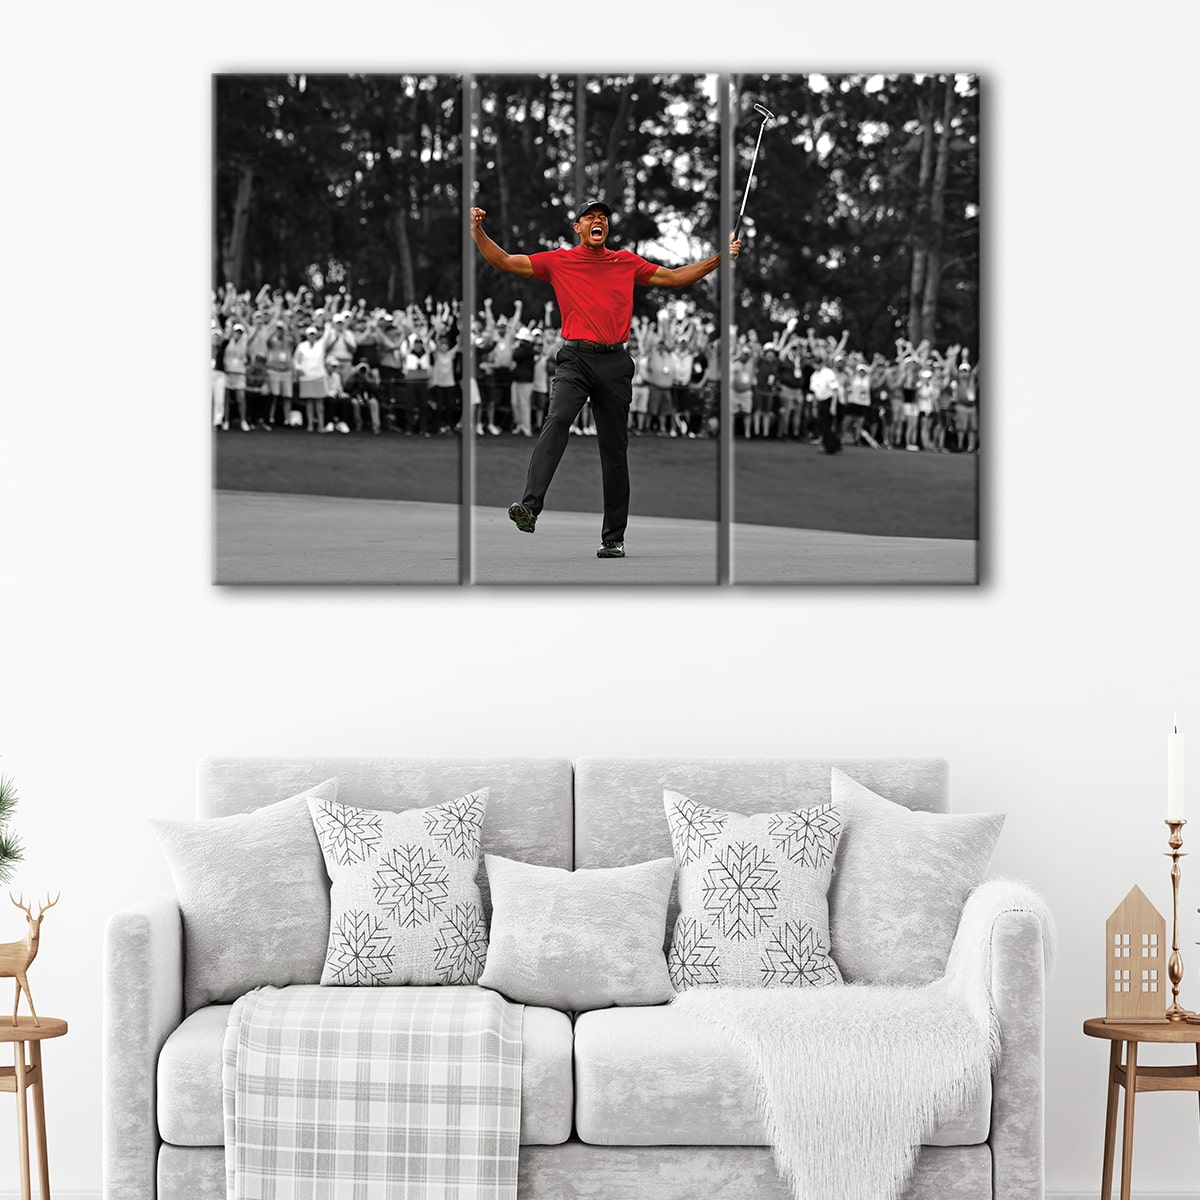 Tiger Woods Giant Wall Art New Poster Print Picture XL